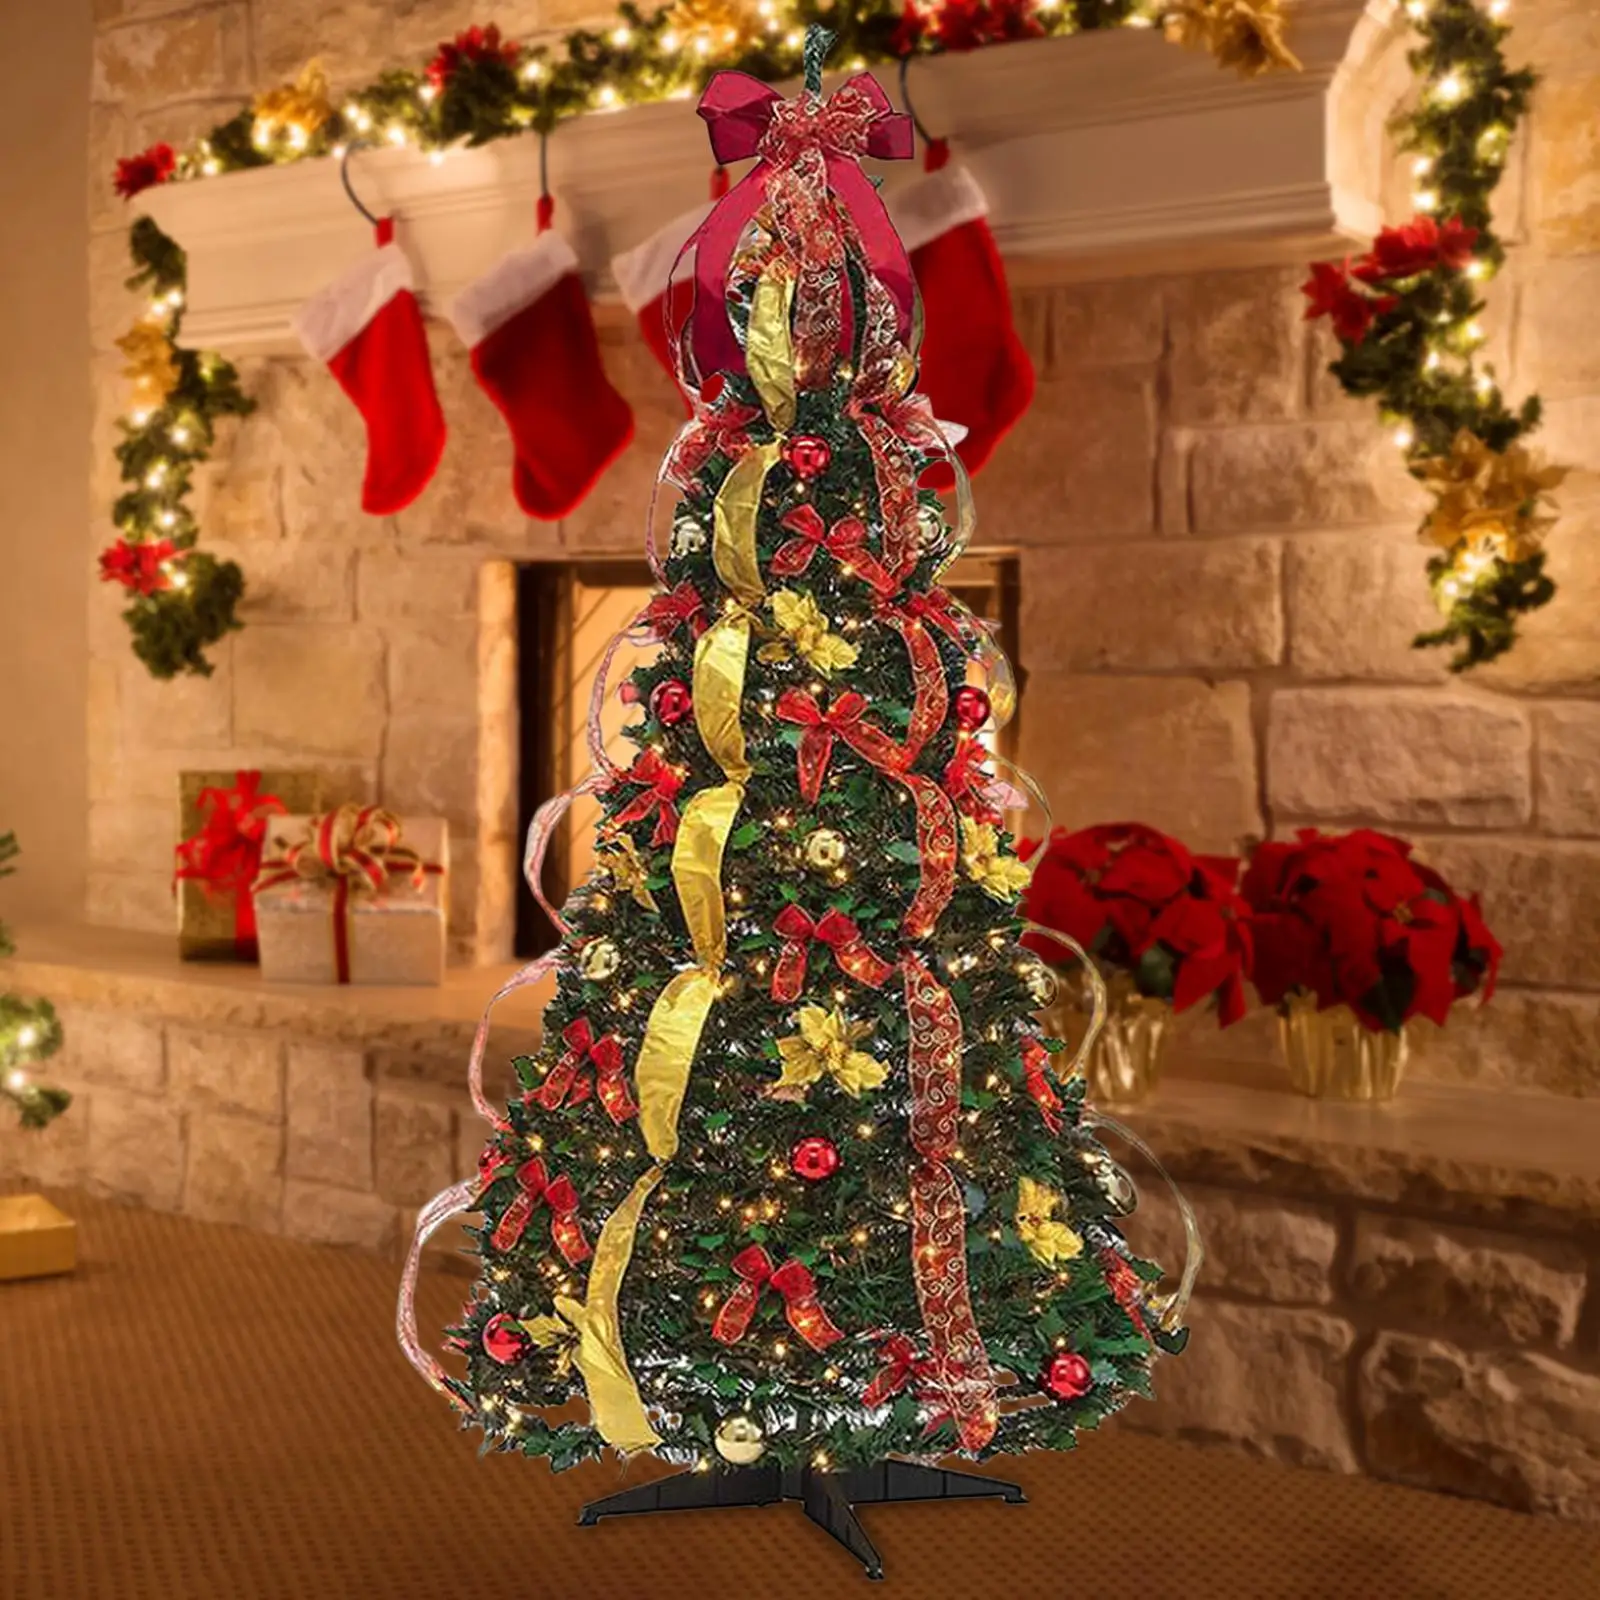 Foldable Christmas Tree 6 ft Easy Assembly Ornaments with Lights Lighted Xmas Tree for Office Outdoor Home Indoor Decoration